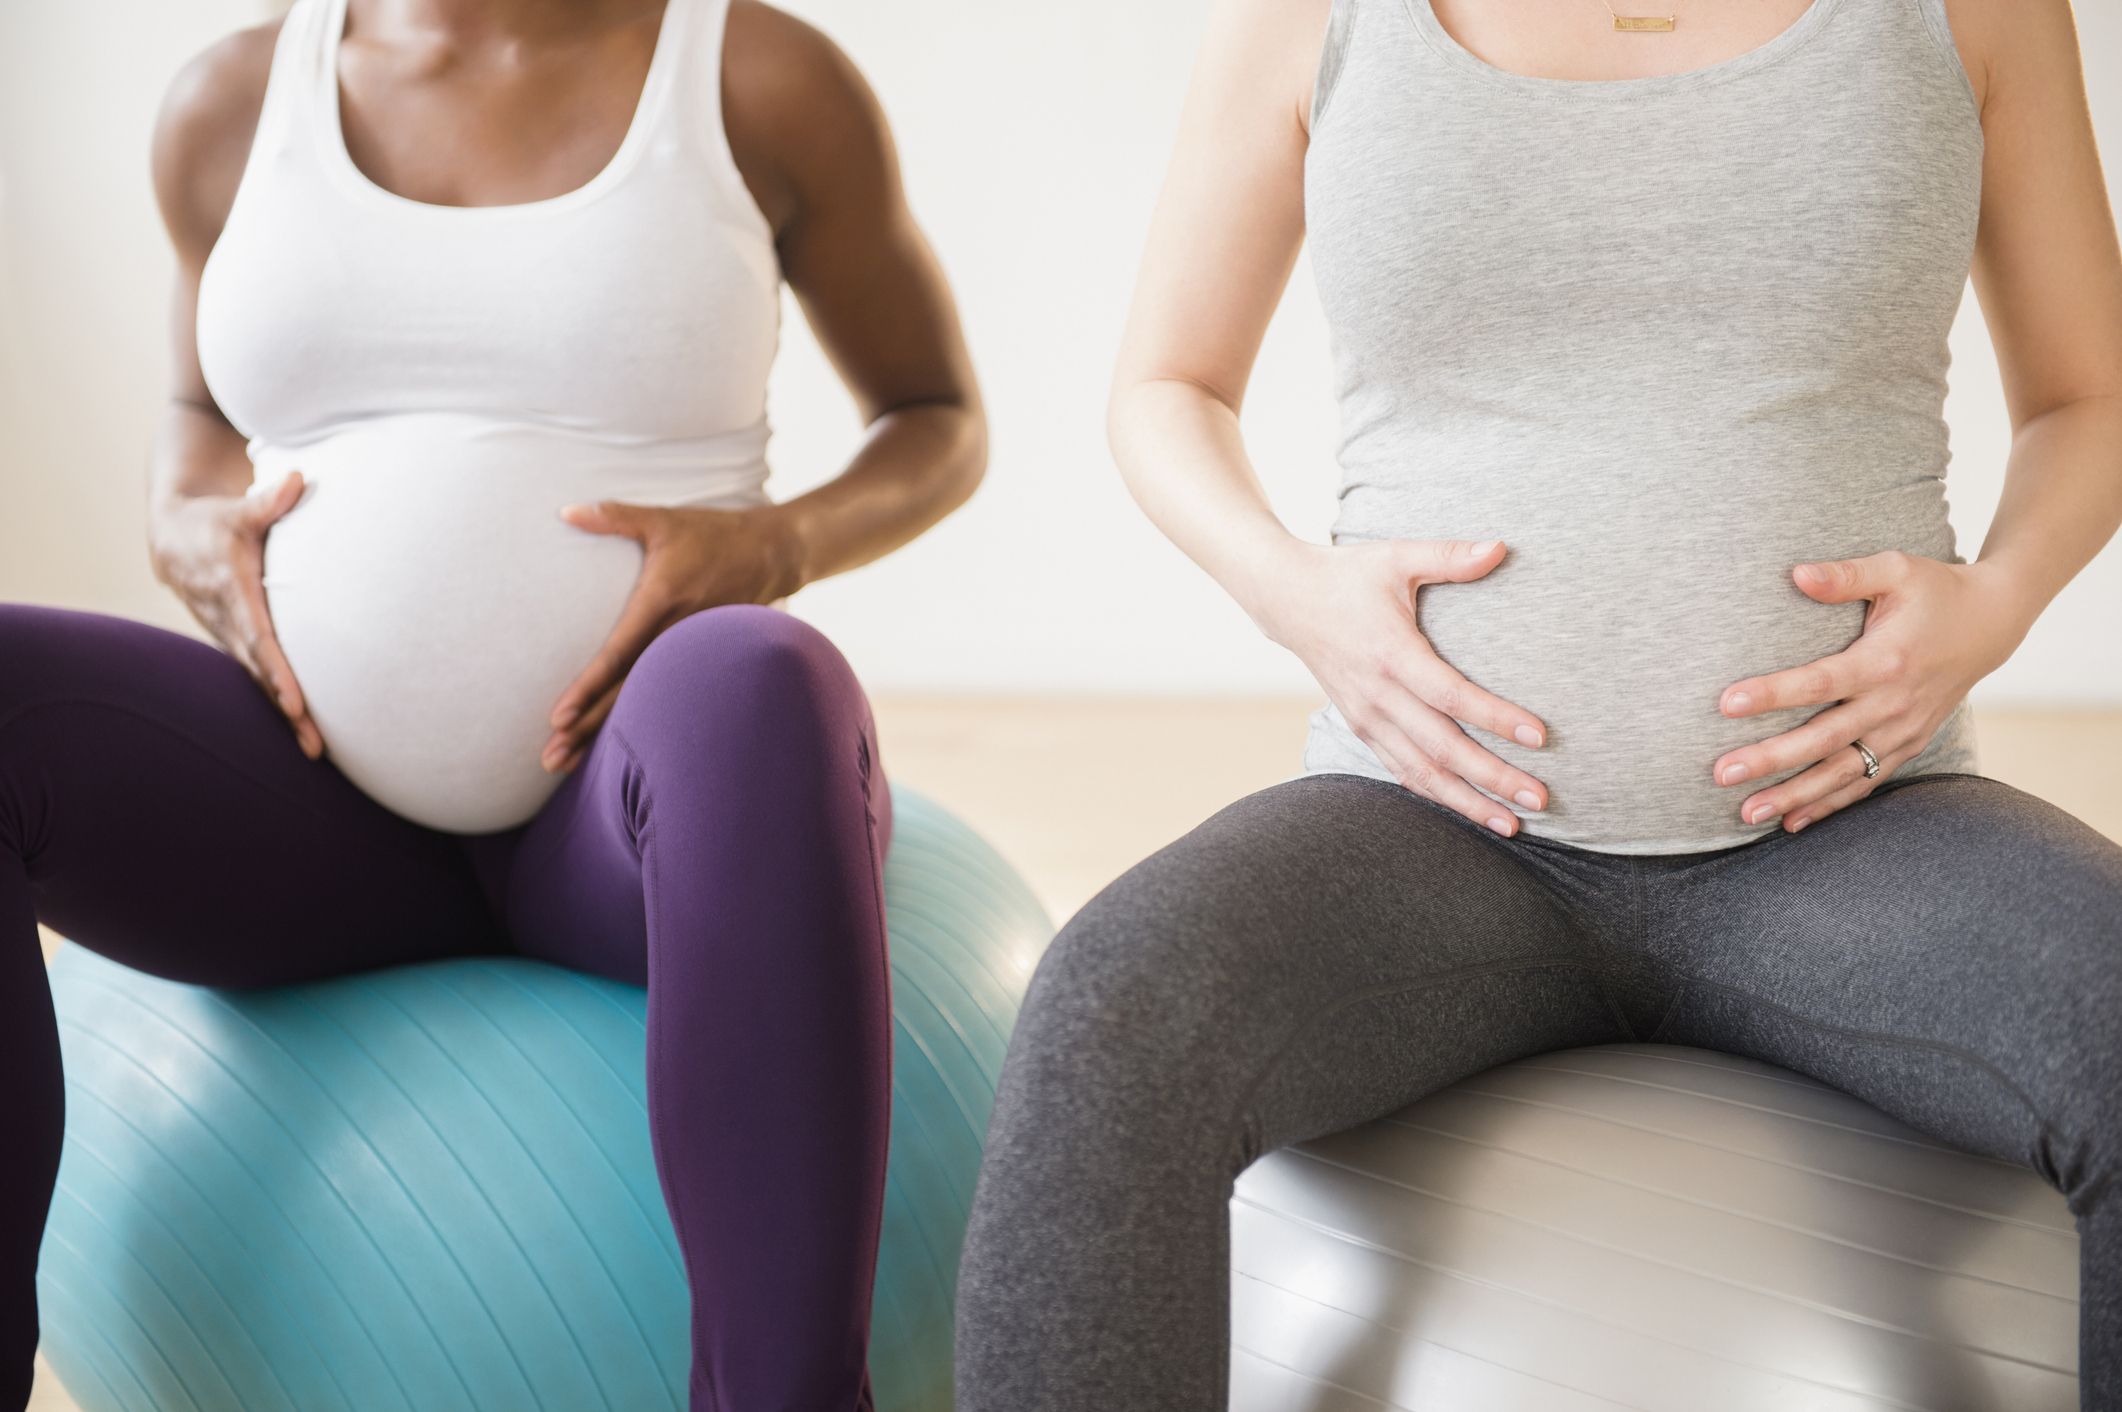 Birthing ball exercises for pregnancy: by expert Hollie Grant